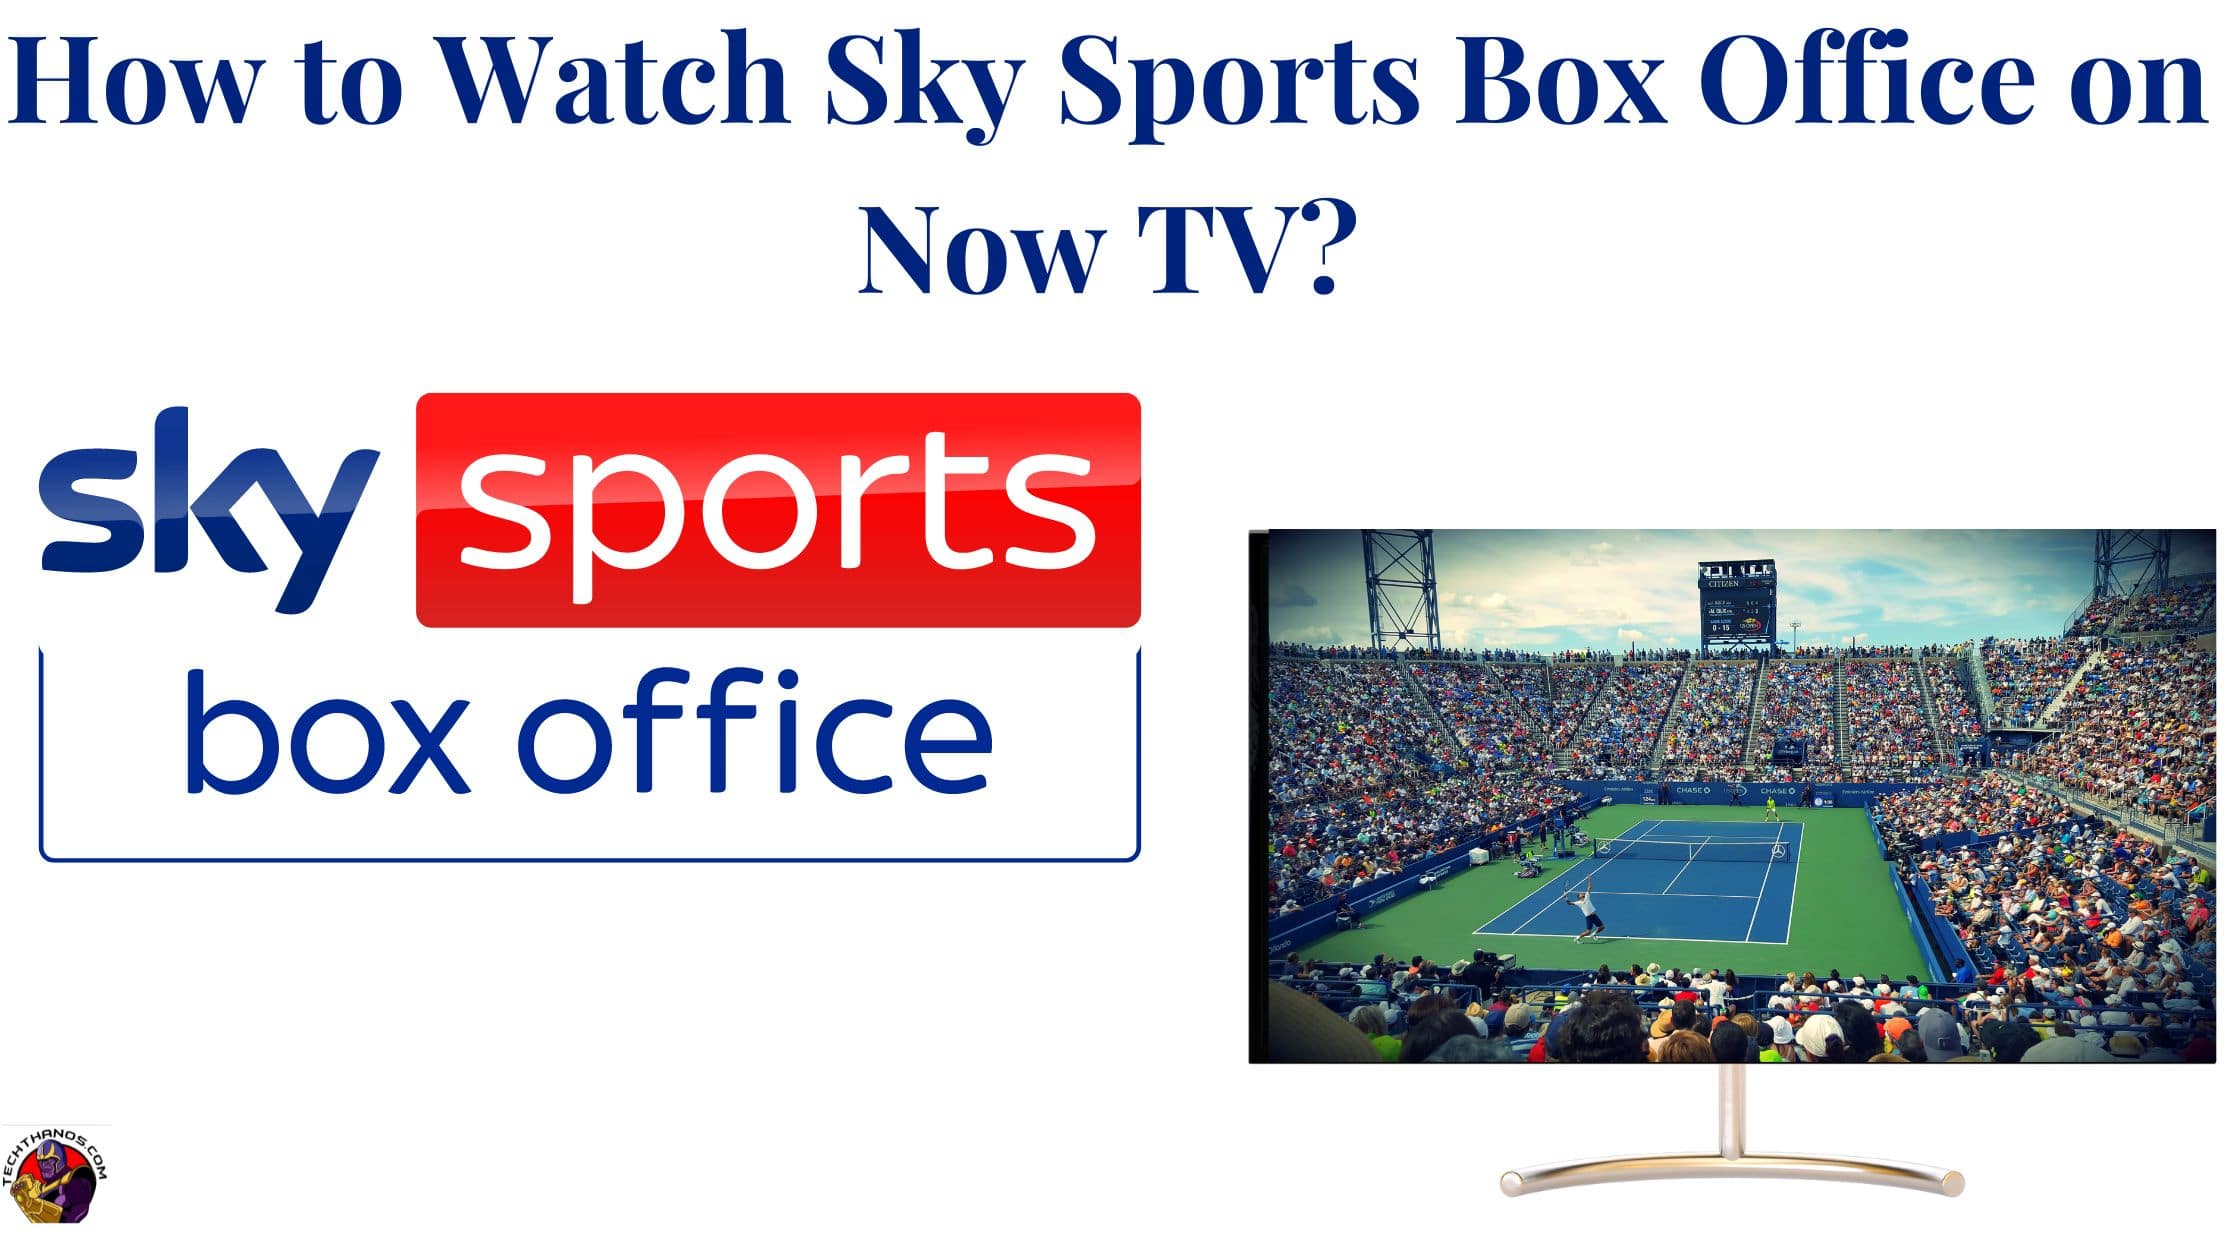 How to Watch Sky Sports Box Office on Now TV